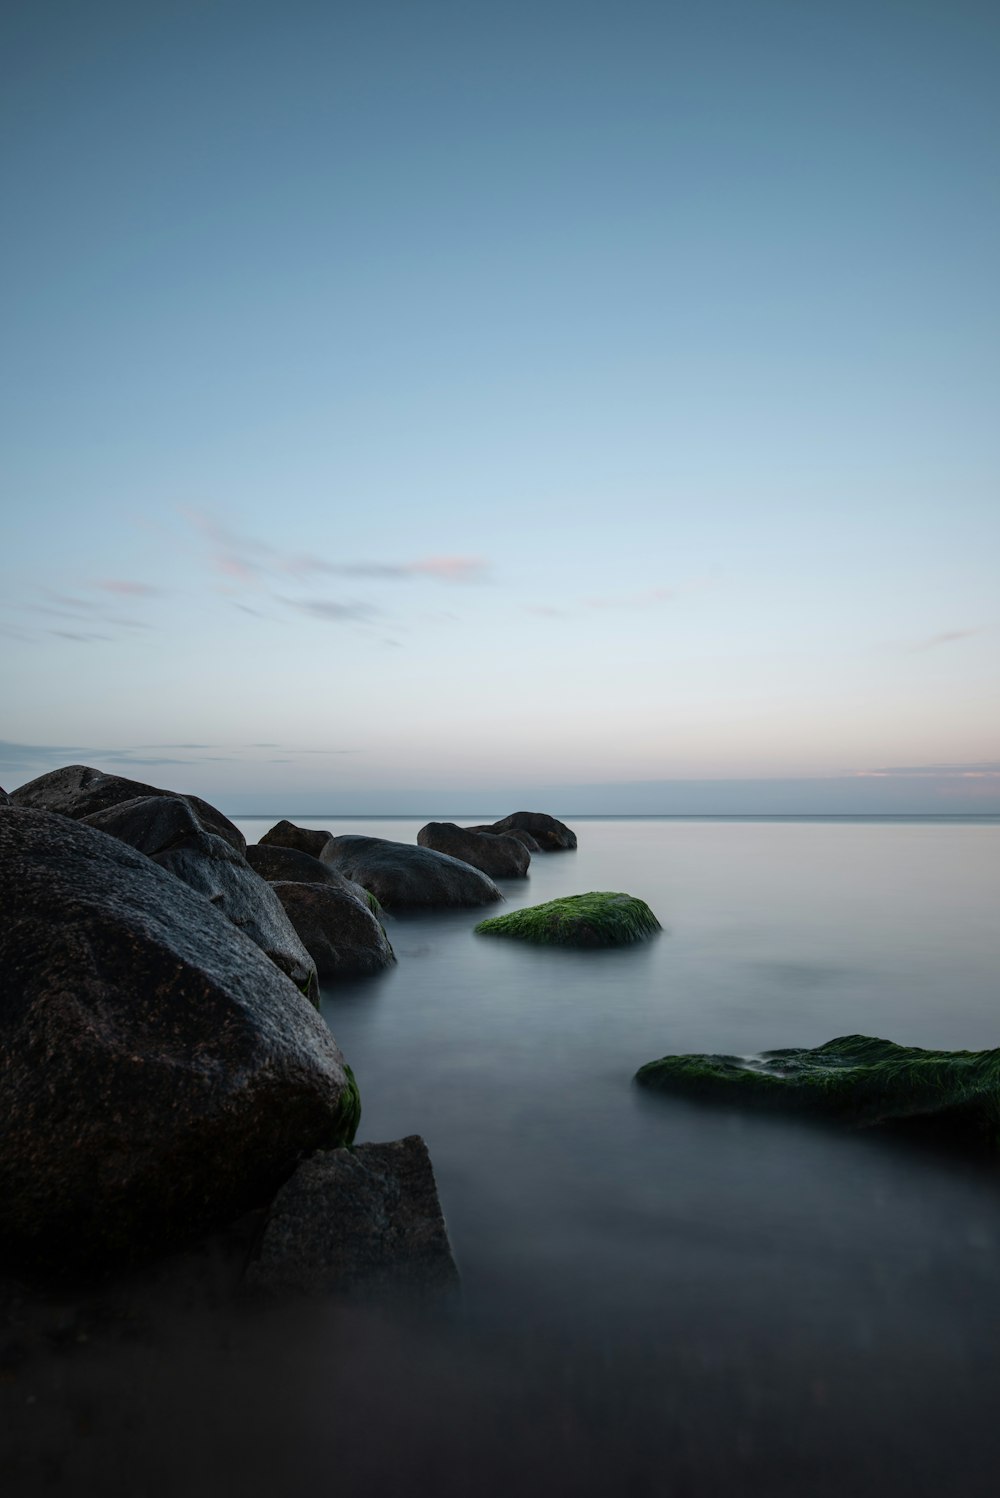 a long exposure of the ocean with rocks in the foreground